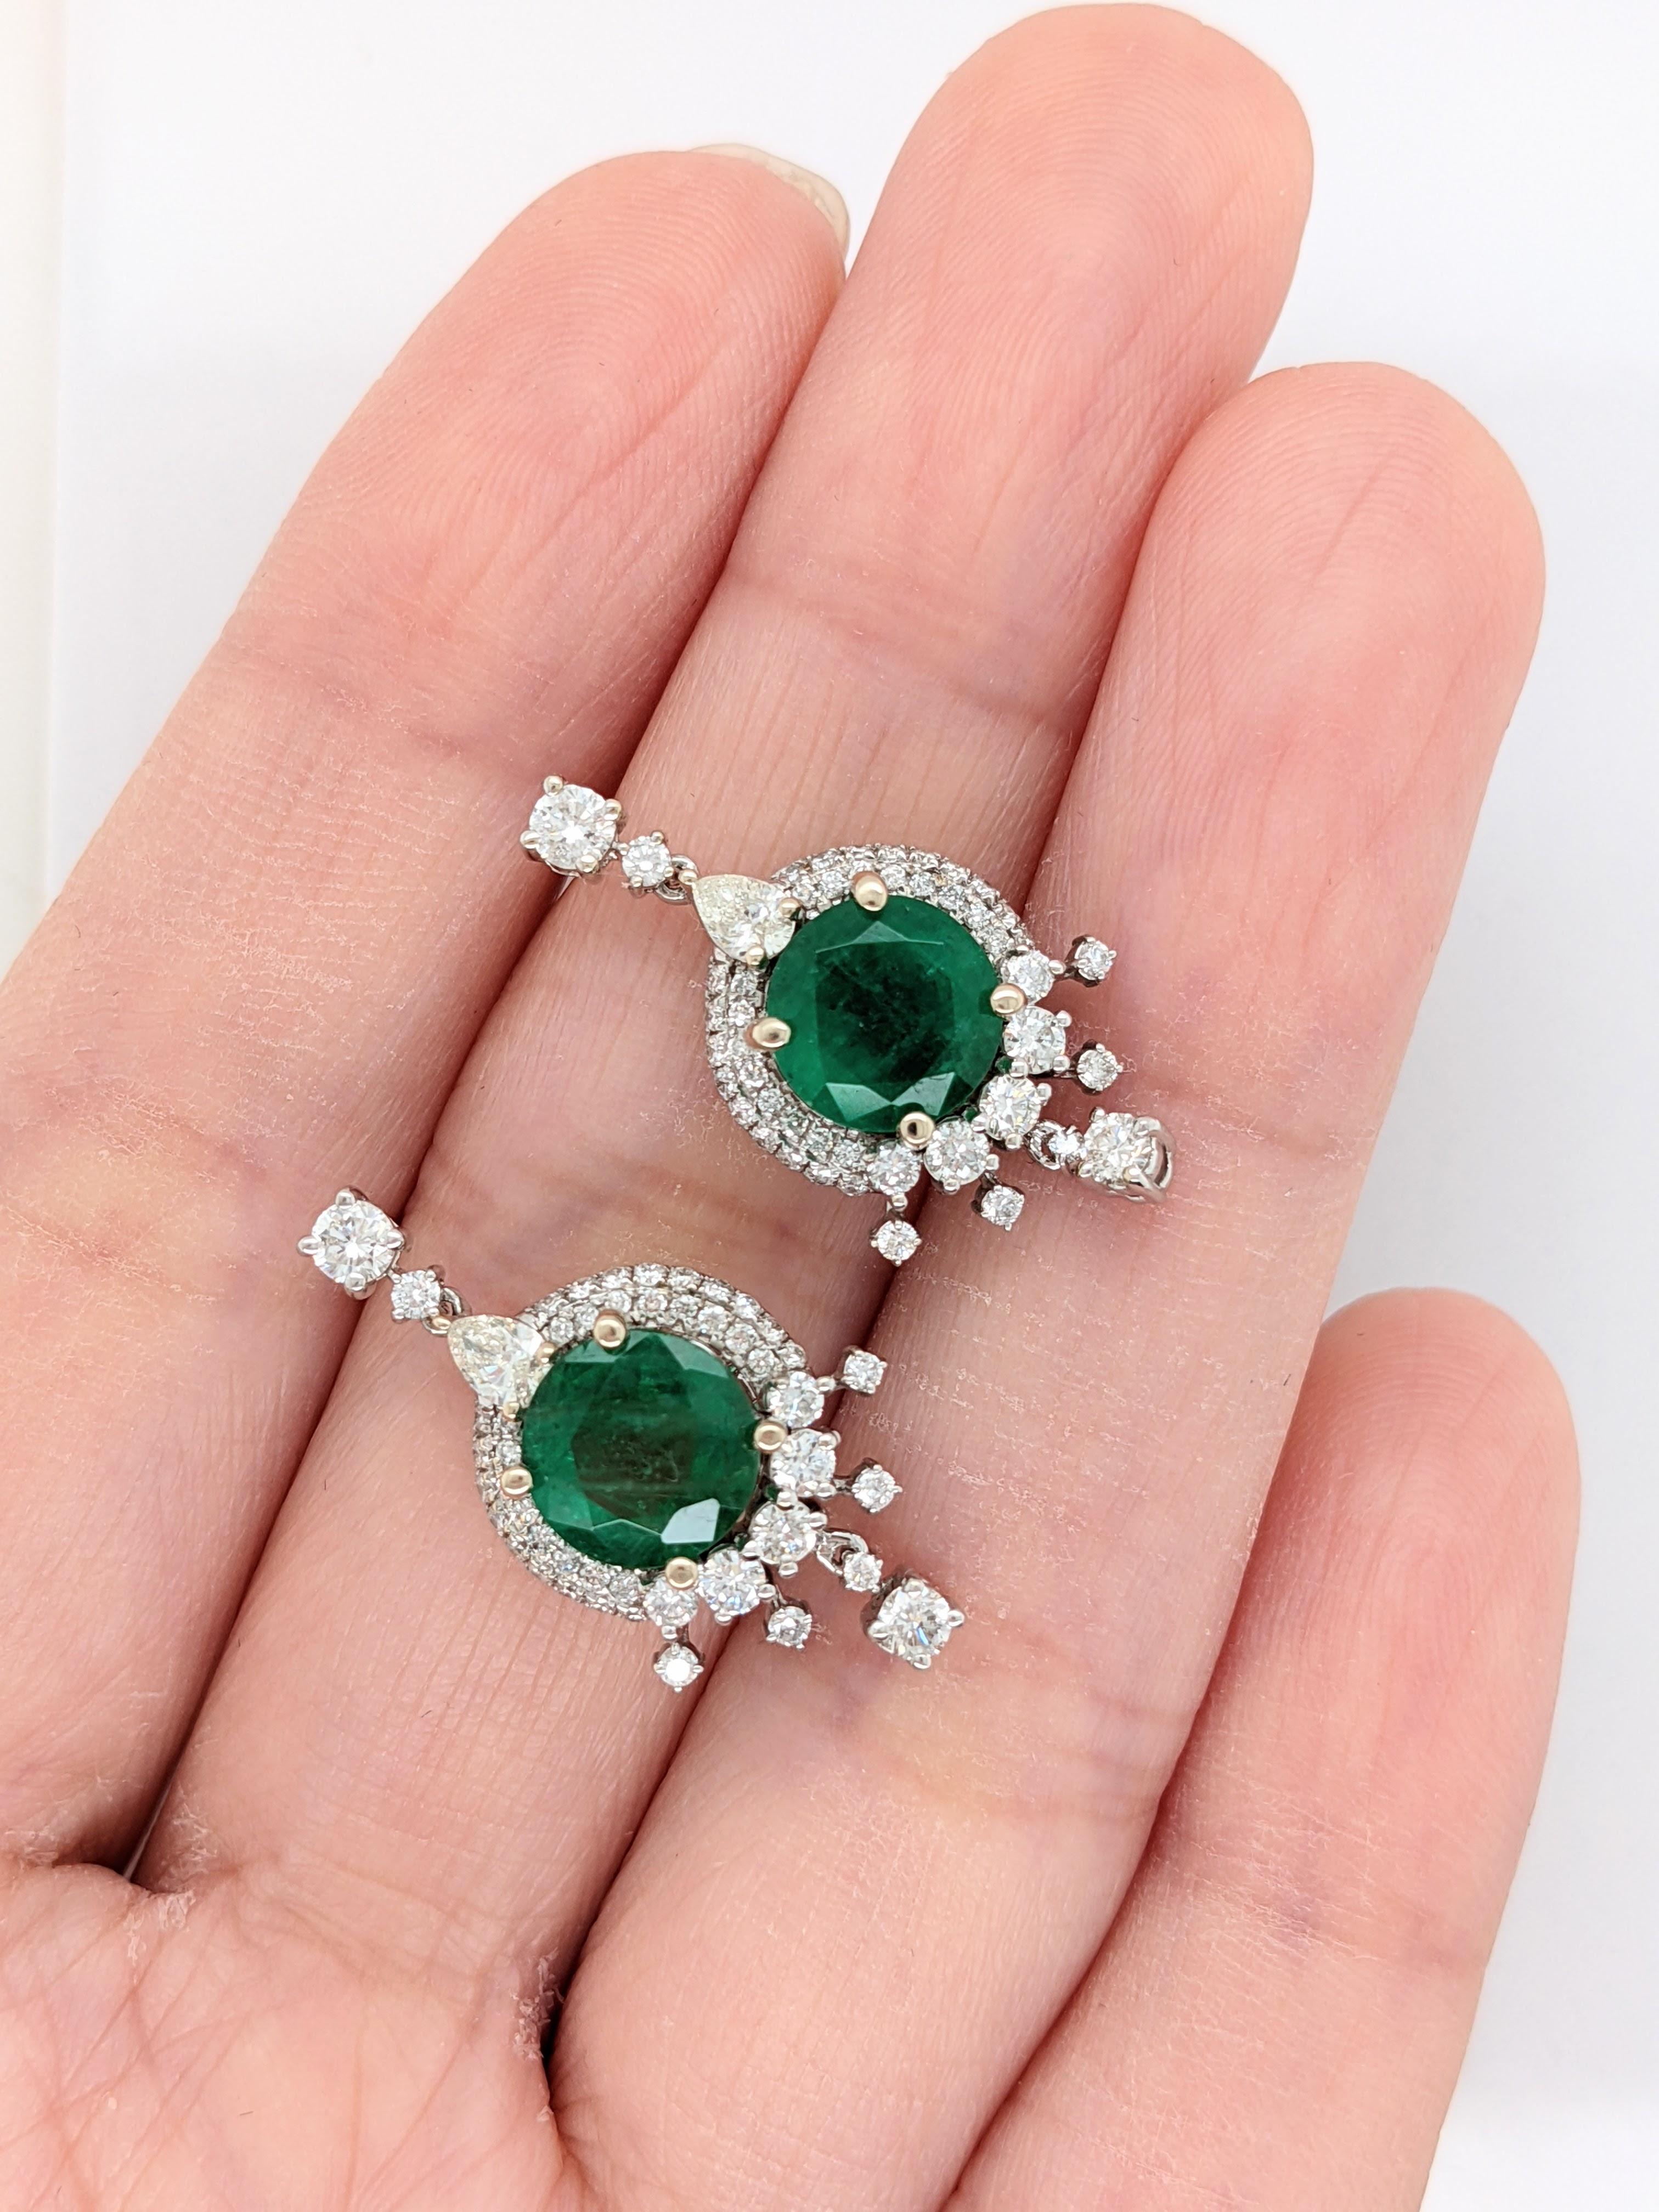 Item Type: Earring
Gold Purity: 14k
Gold weight: 5.02 grams
Diamond: 98 diamonds totaling 1.3 cts

Stone Specs:
Type: Zambian Emerald
Weight: 3.57 cts
Shape: Round
Size: 8mm
Treatment: Oiled
Hardness: 7.5-8
Origin: Zambia


These earrings are made